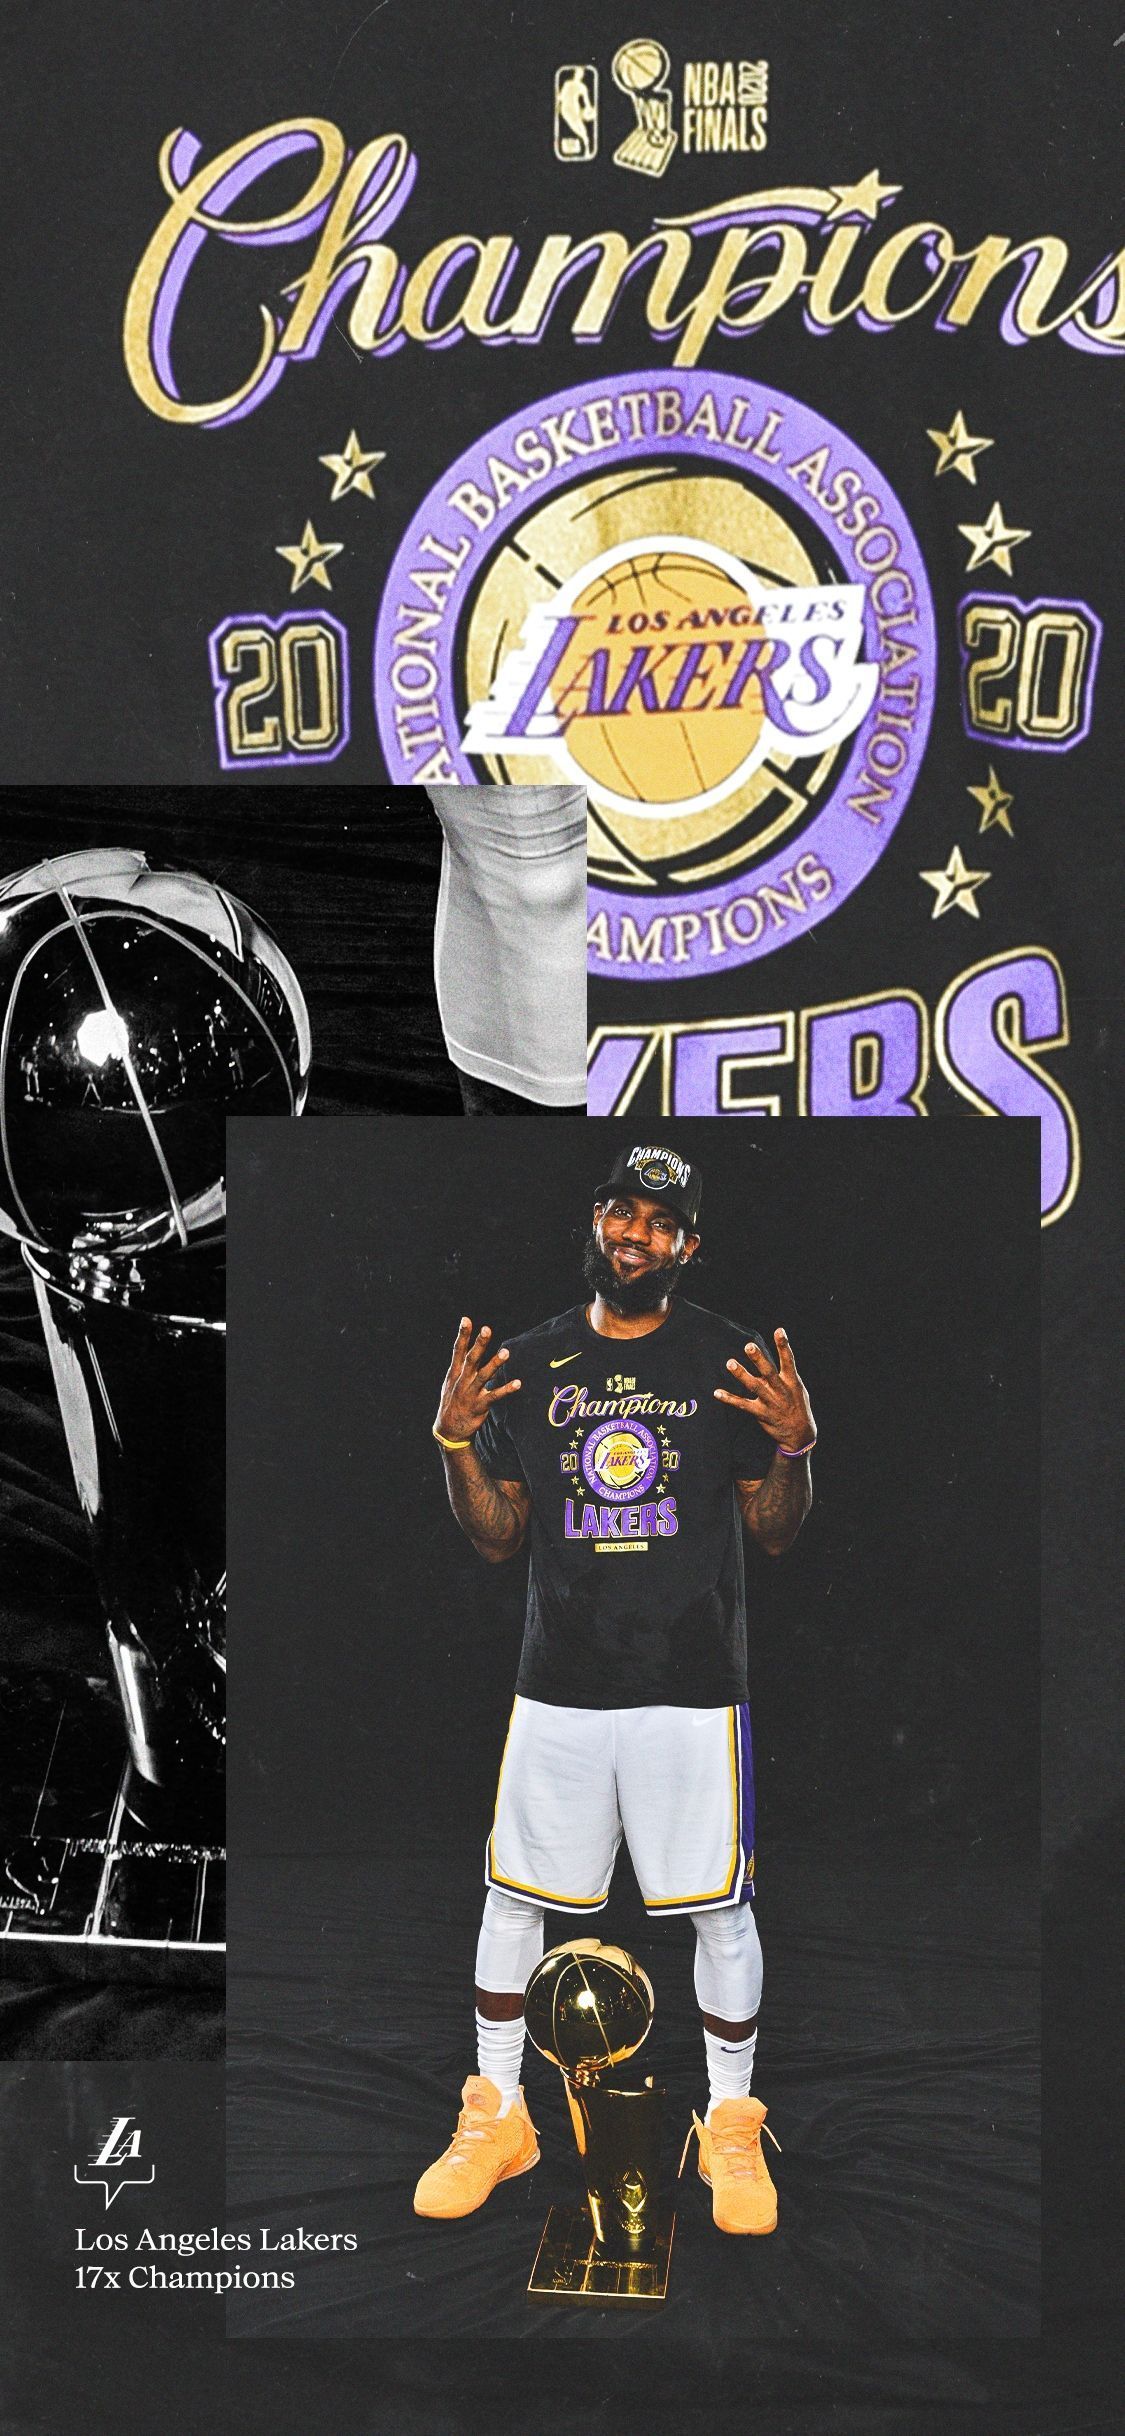 Lakers wallpaper I made for my phone - Los Angeles Lakers